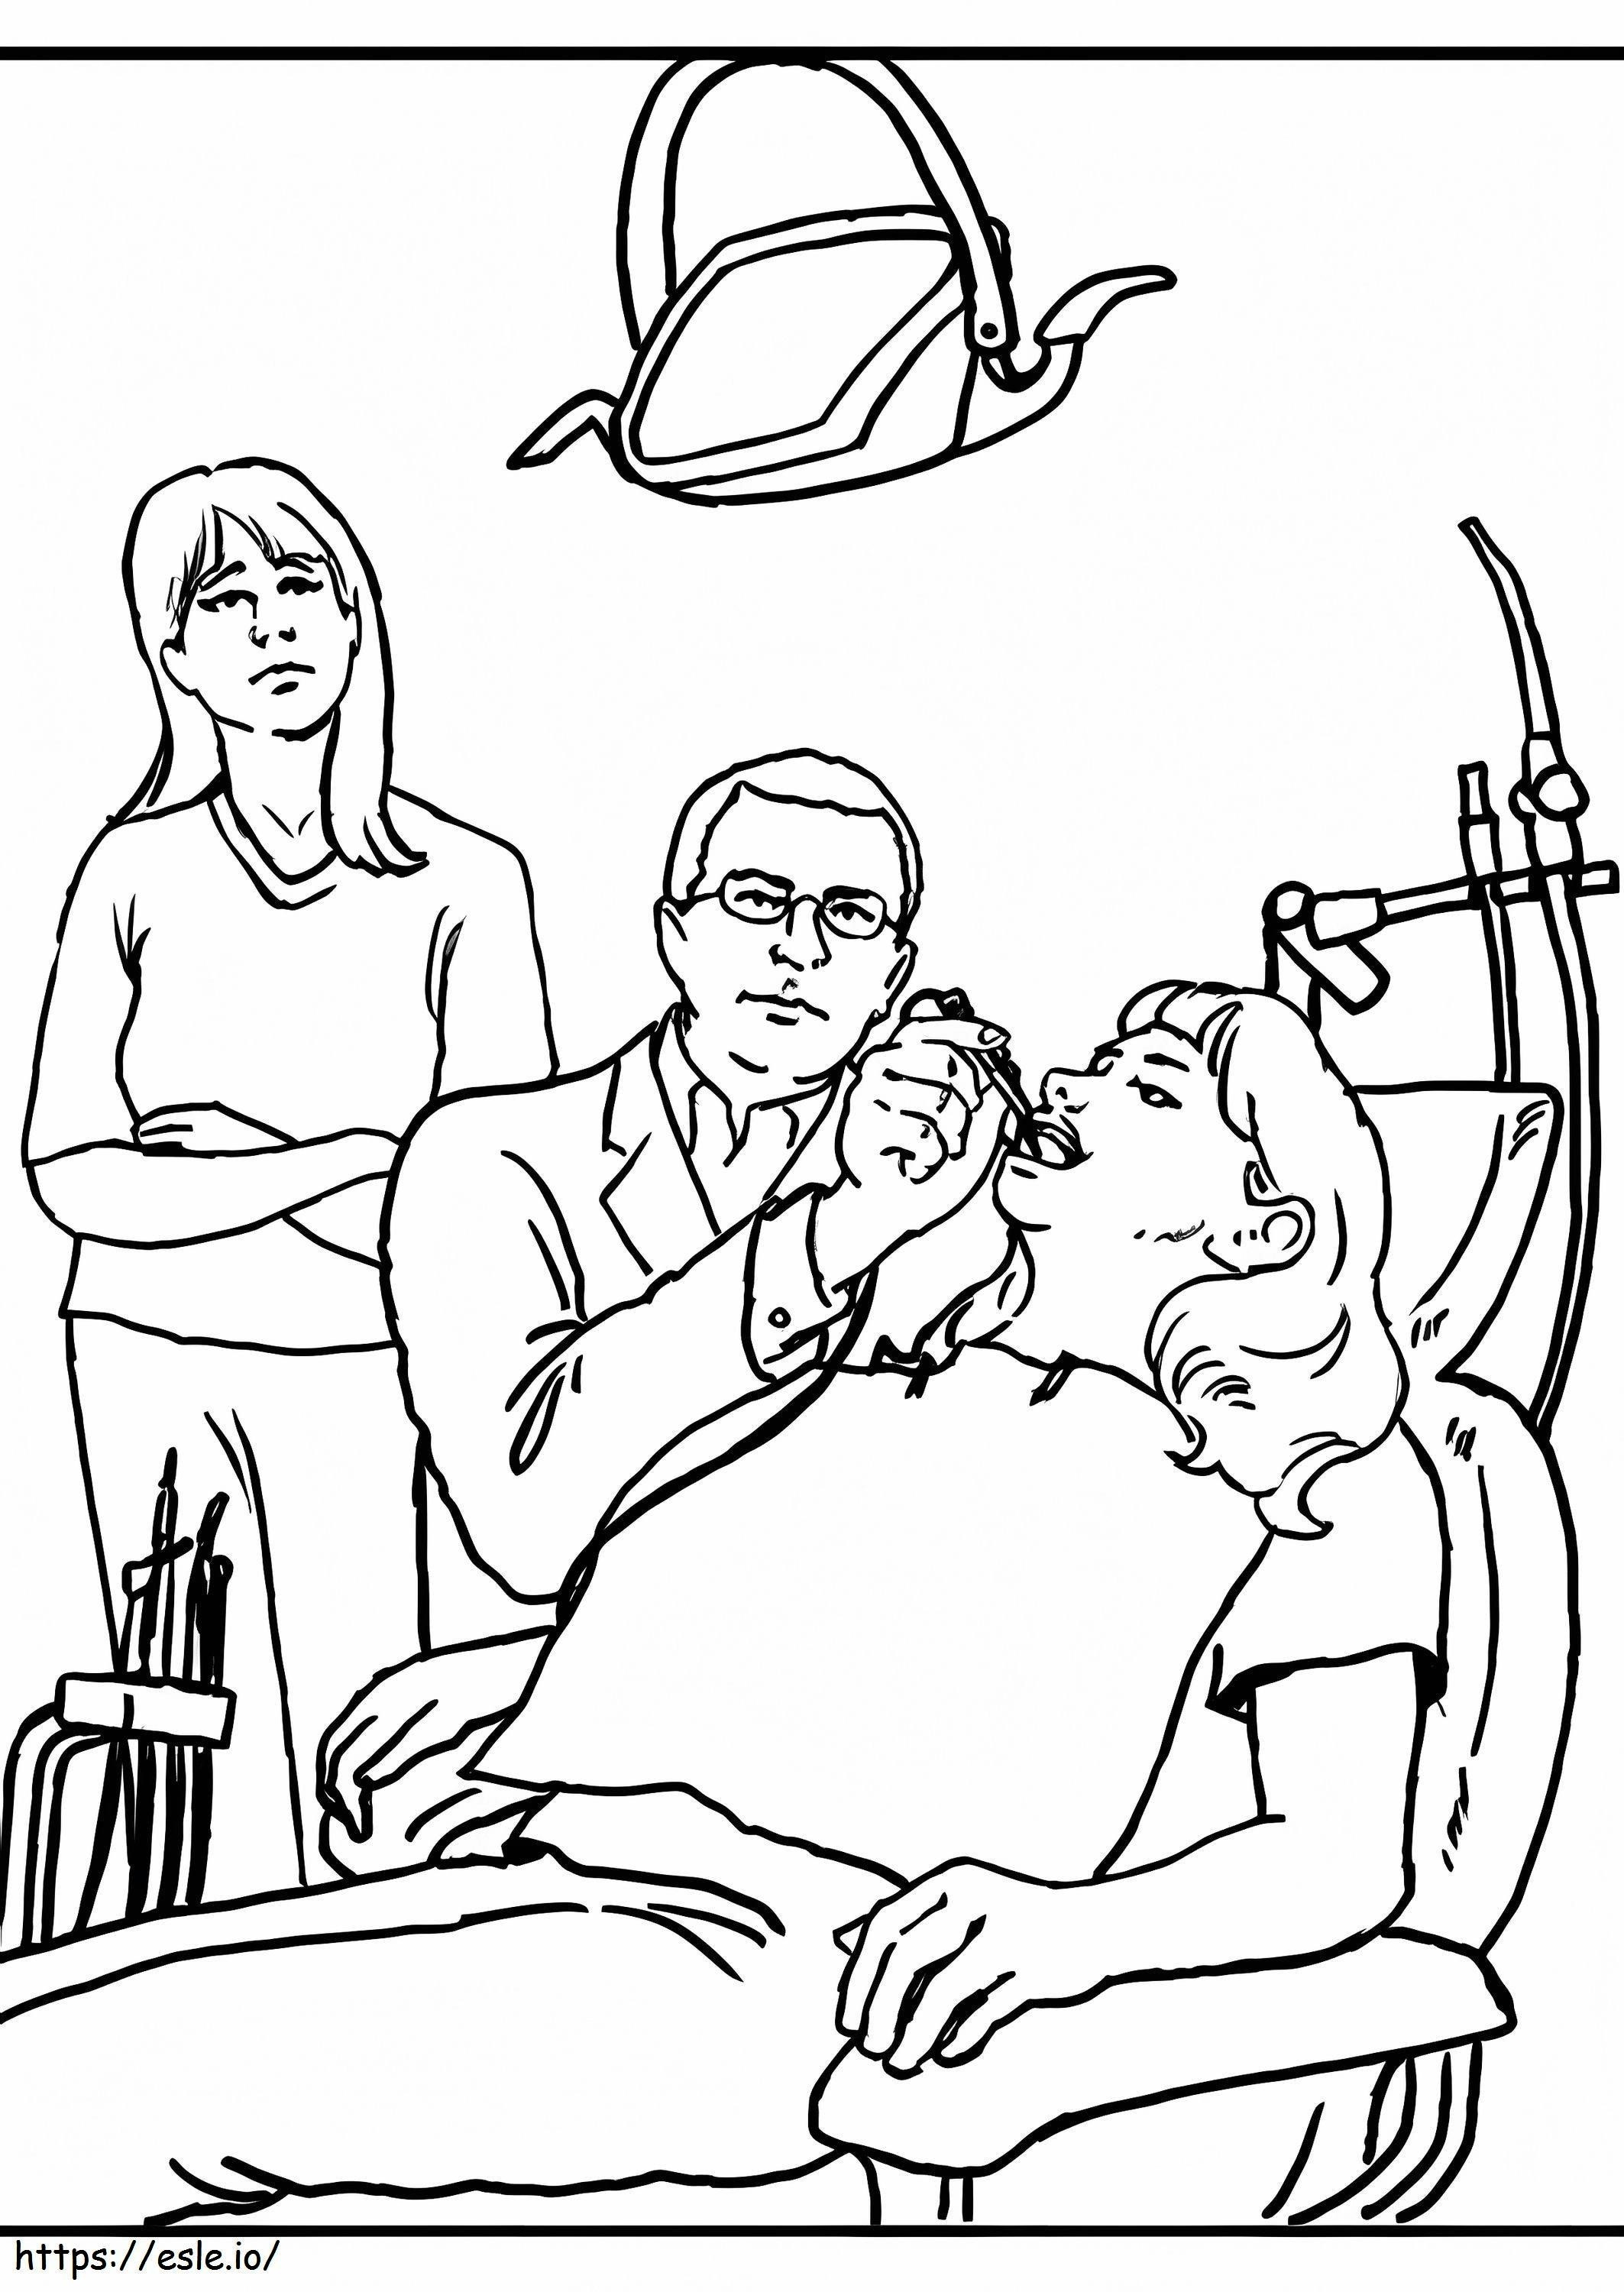 Dentist 6 coloring page